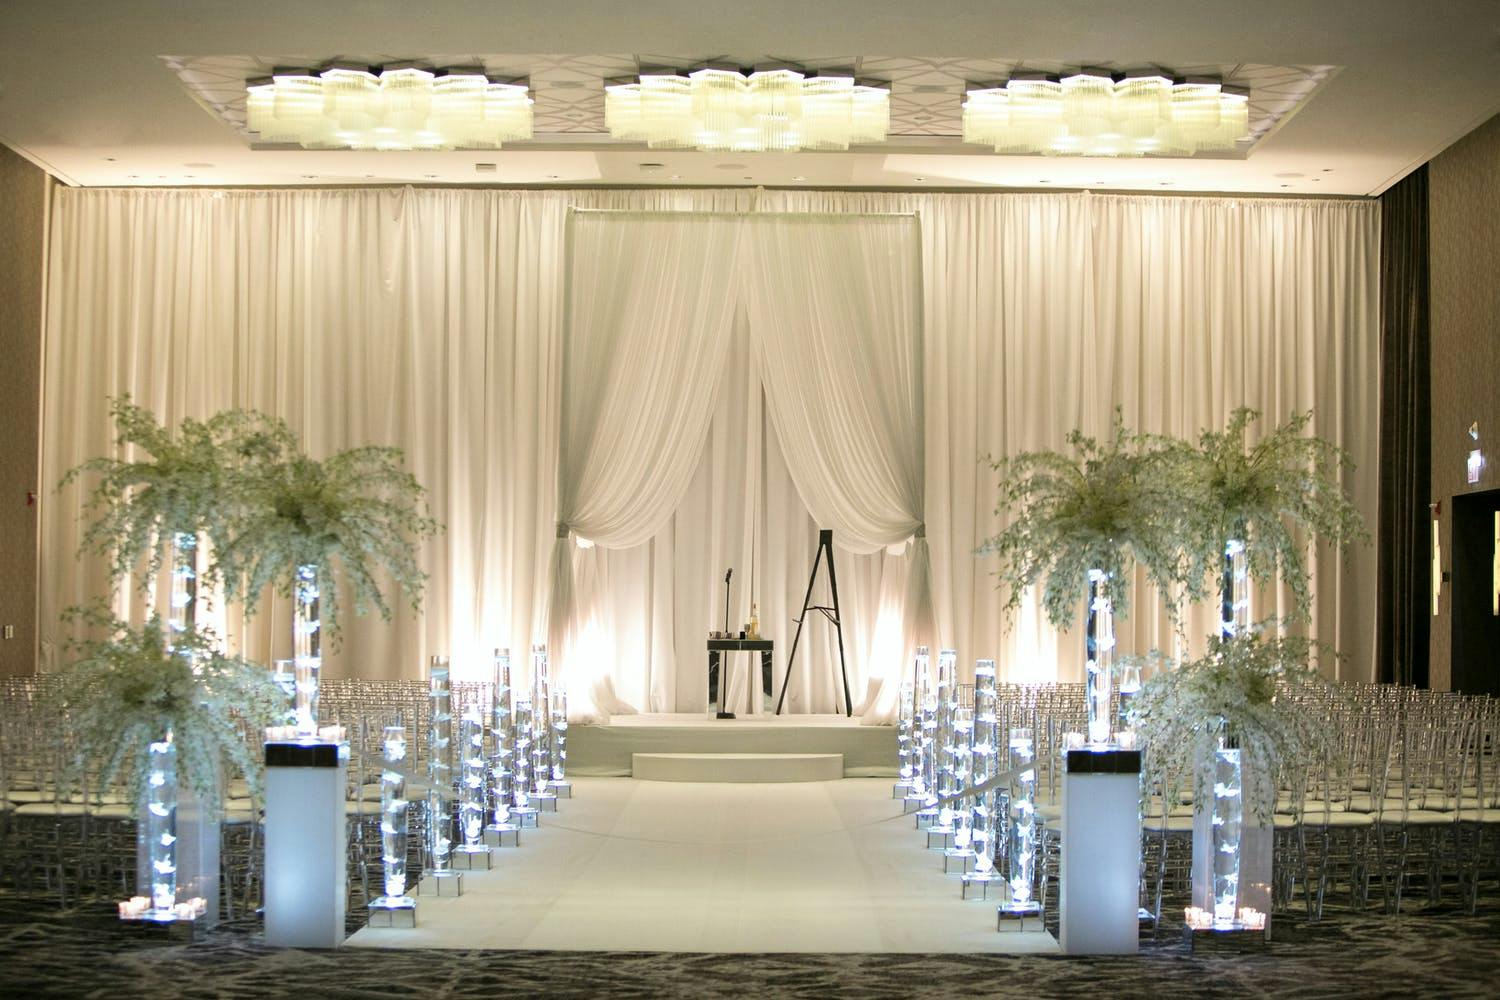 Modern Wedding Ceremony With White Drapery Backdrop and Candlelit Aisle Markers | PartySlate